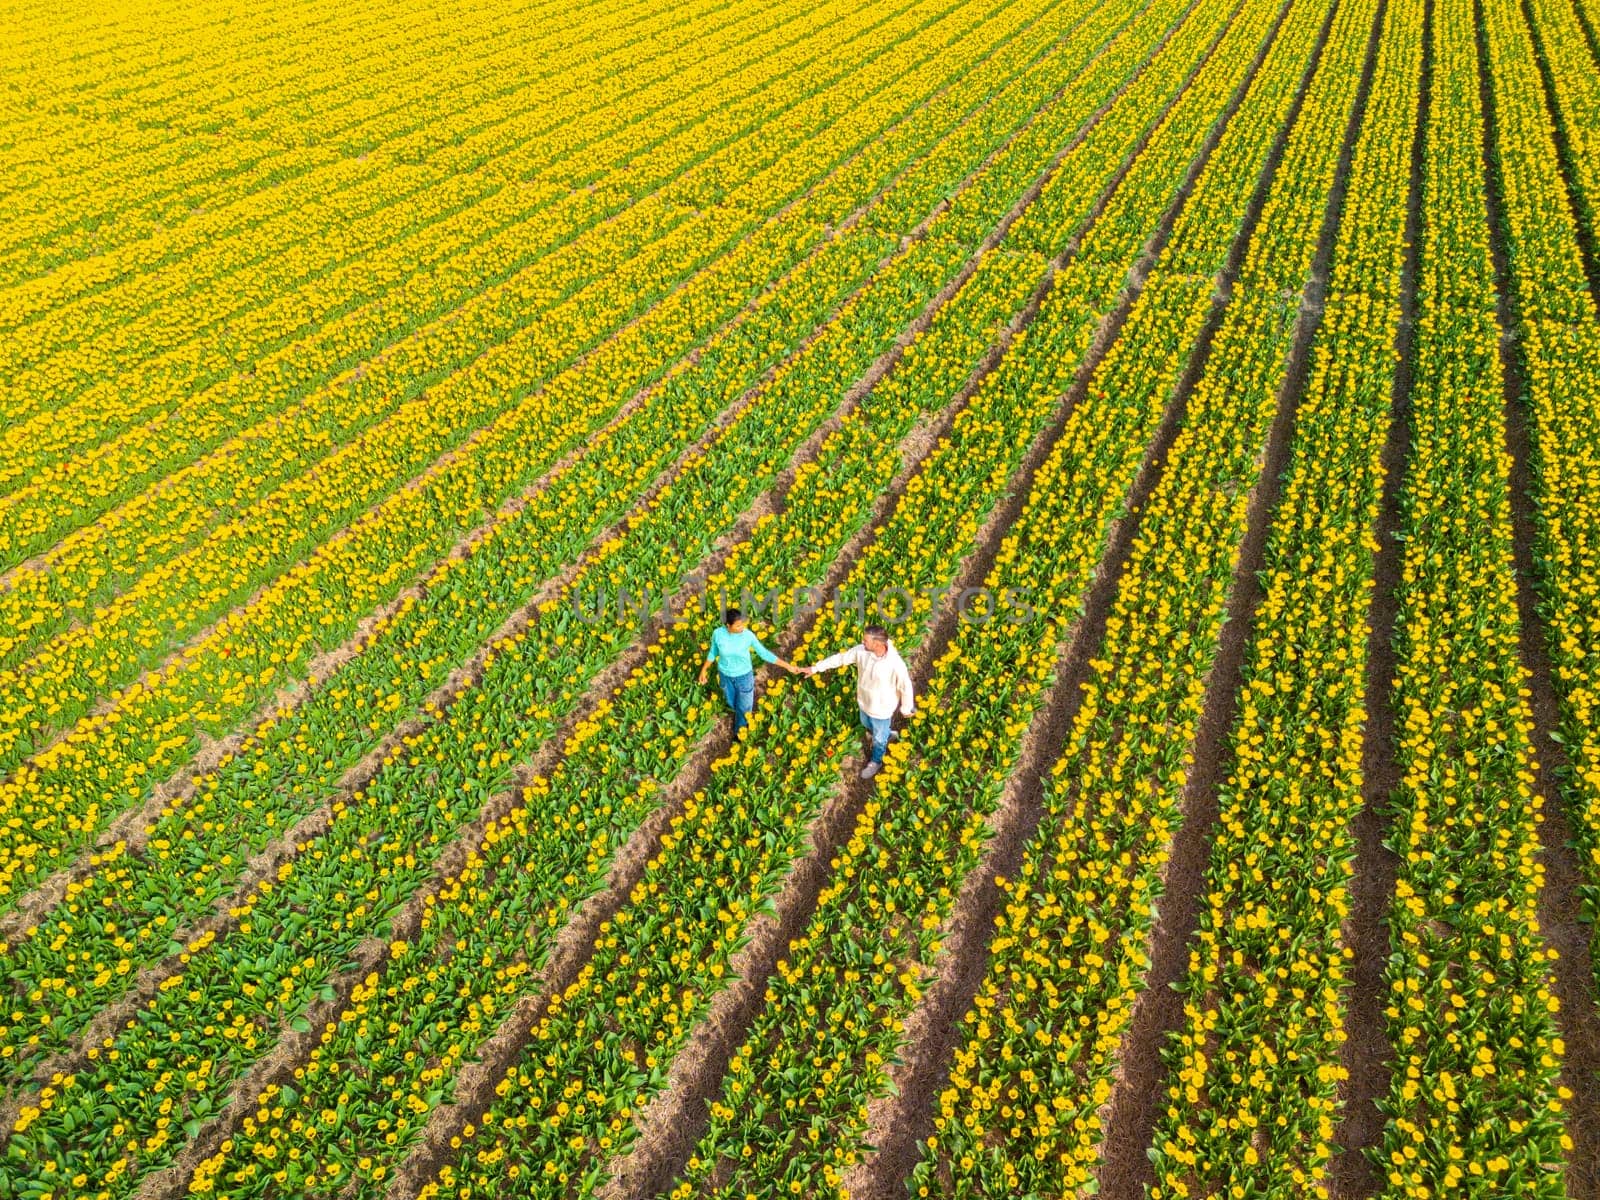 Men and women in flower fields seen from above with a drone in the Netherlands, Tulip fields in the Netherlands during Spring, young diverse couple in spring flower field